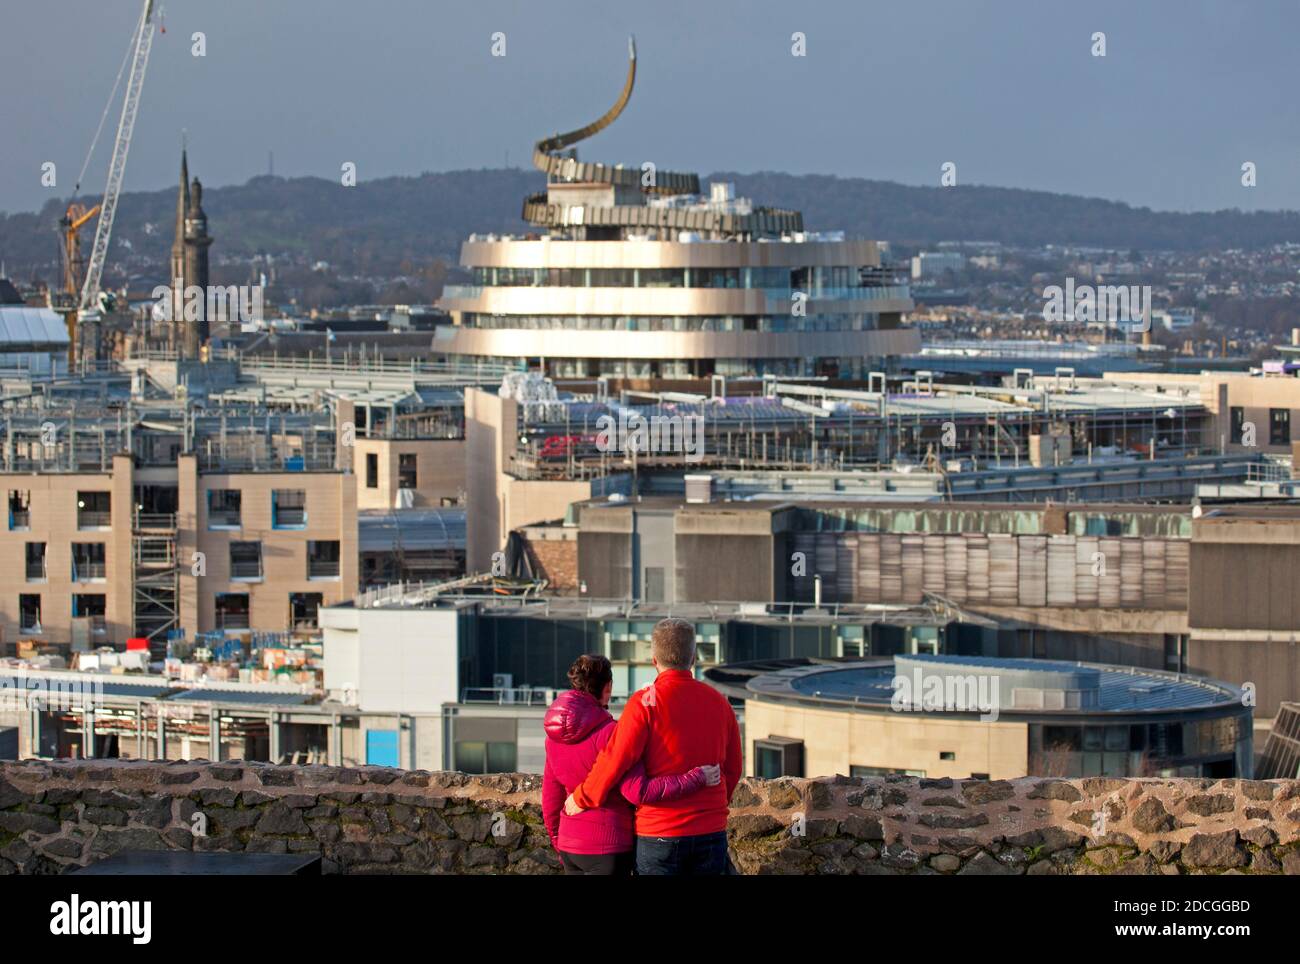 Princes Street and Calton Hill, Edinburgh, Scotland, UK. 21 November 2020. Sunshine and showers with blustery winds for those on Calton Hill. Pictured: This couple look towards the top half of the new St James Quarter building viewed from Calton Hill is set to open up in Easter 2021 and is now visible from various angles on the Edinburgh skyline. Credit: Arch White/Alamy Live News. Stock Photo